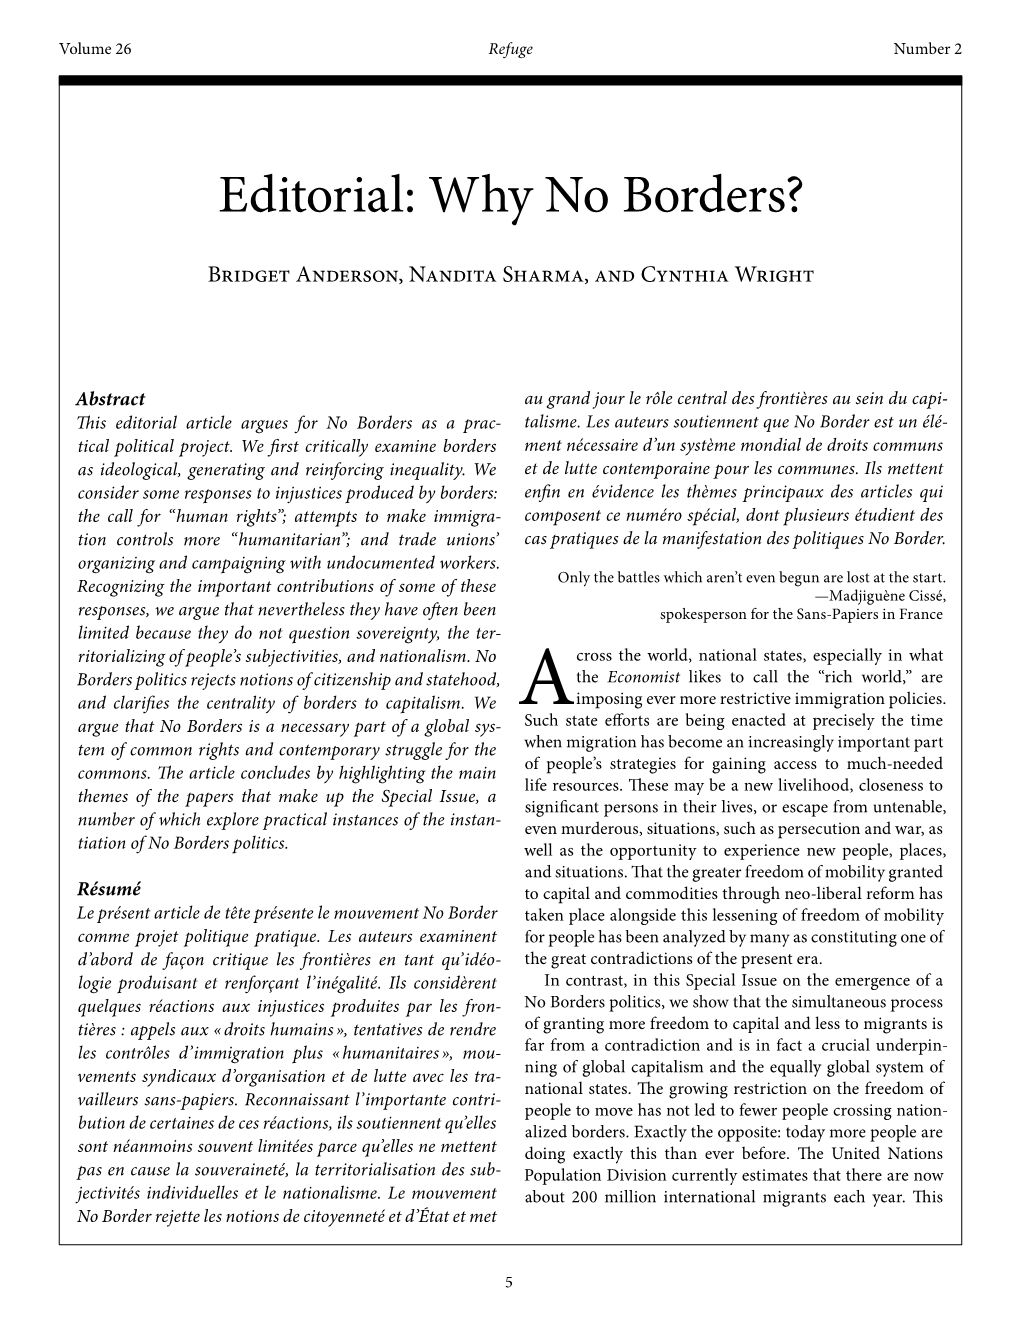 Why No Borders?